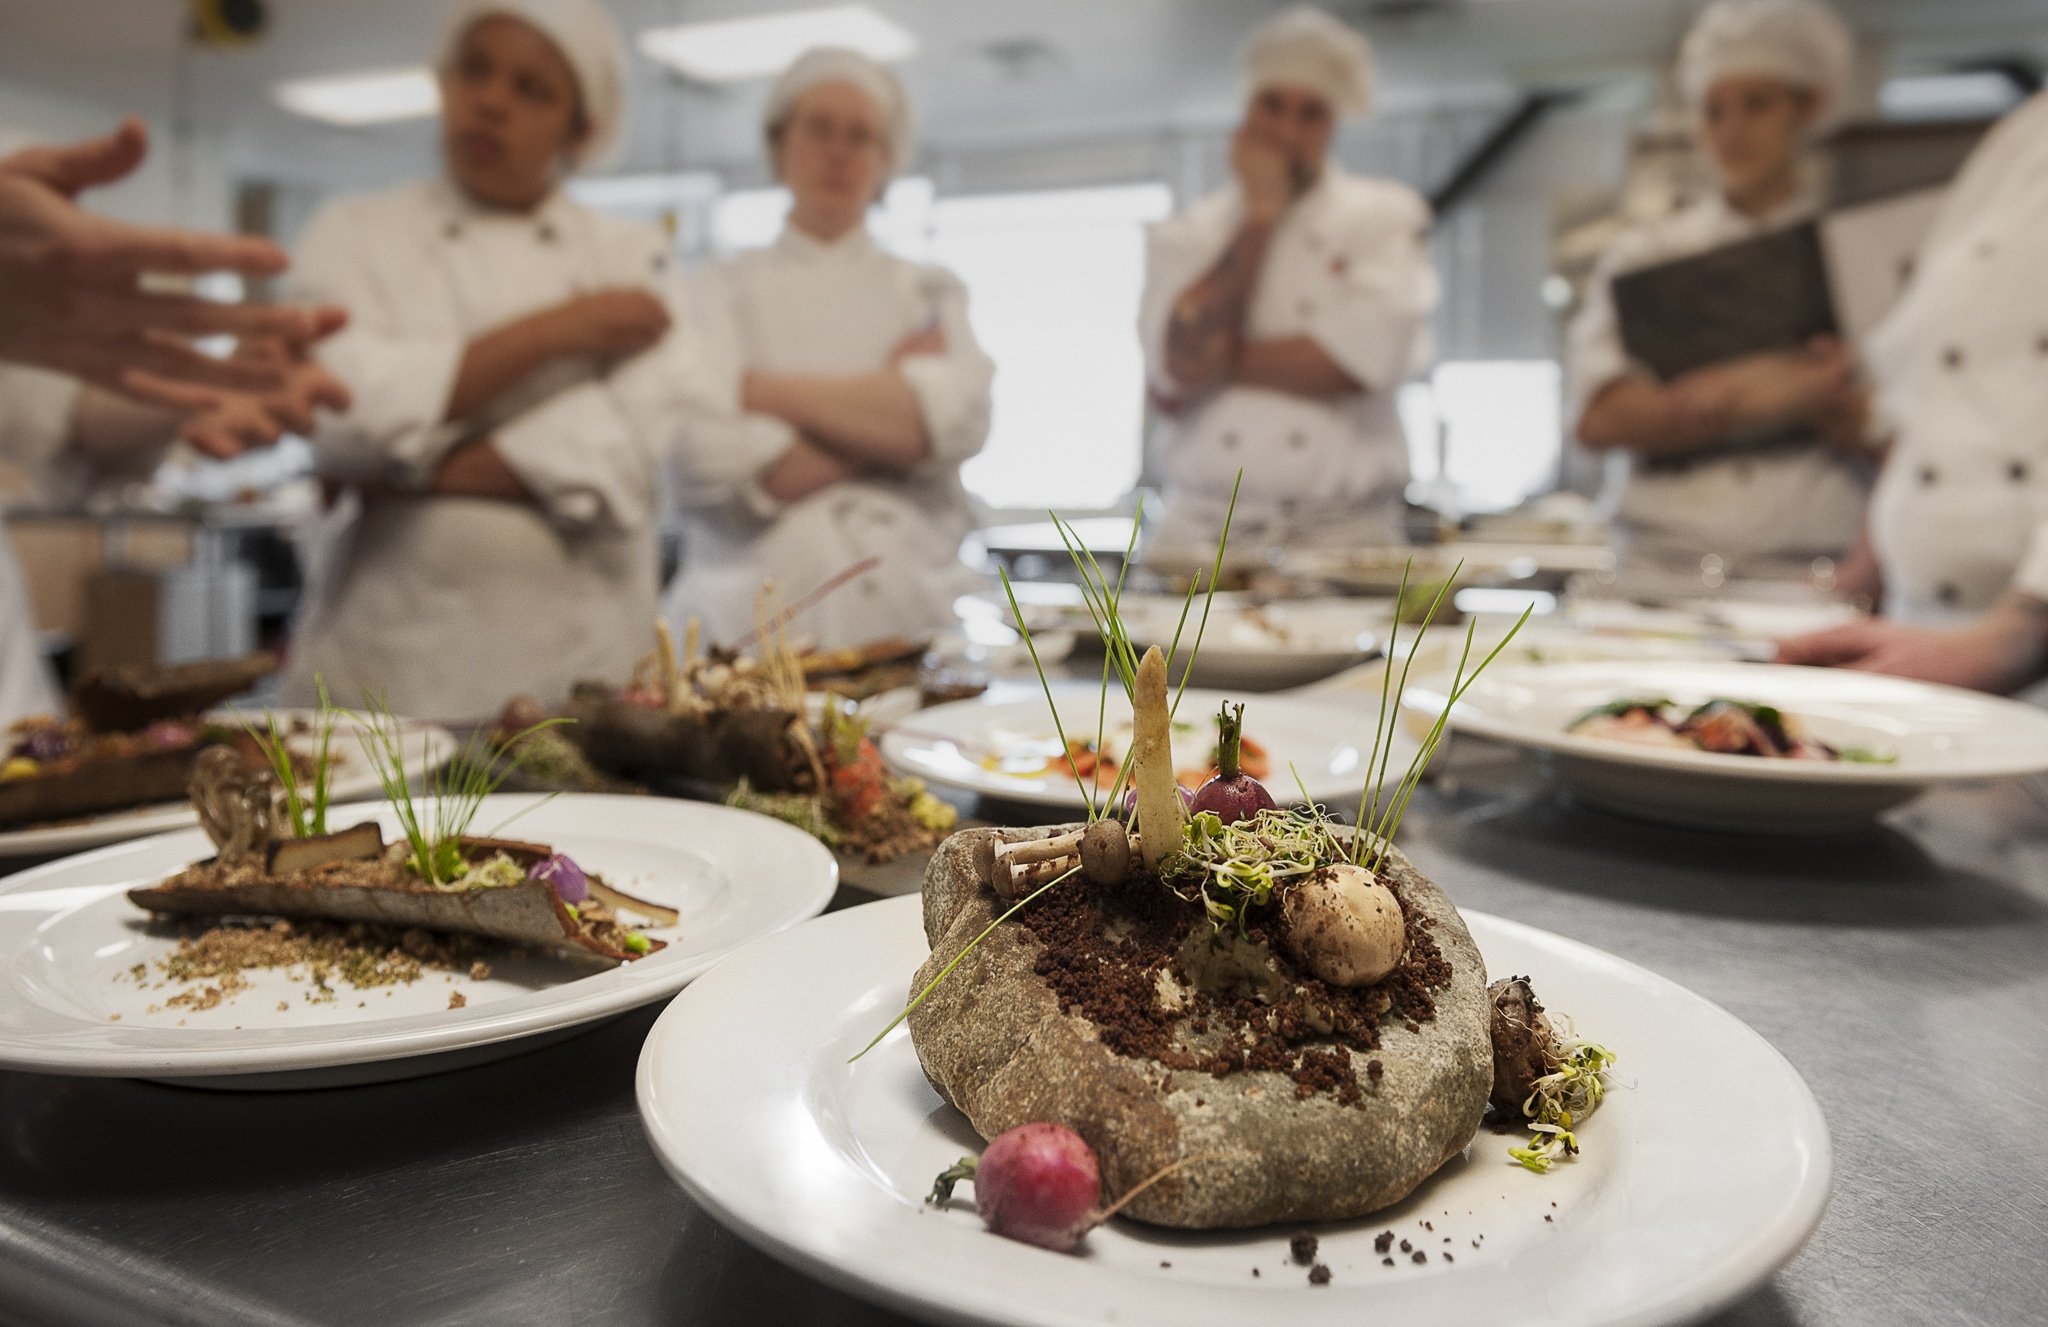 Culinary students receive feedback from their Chef instructor.